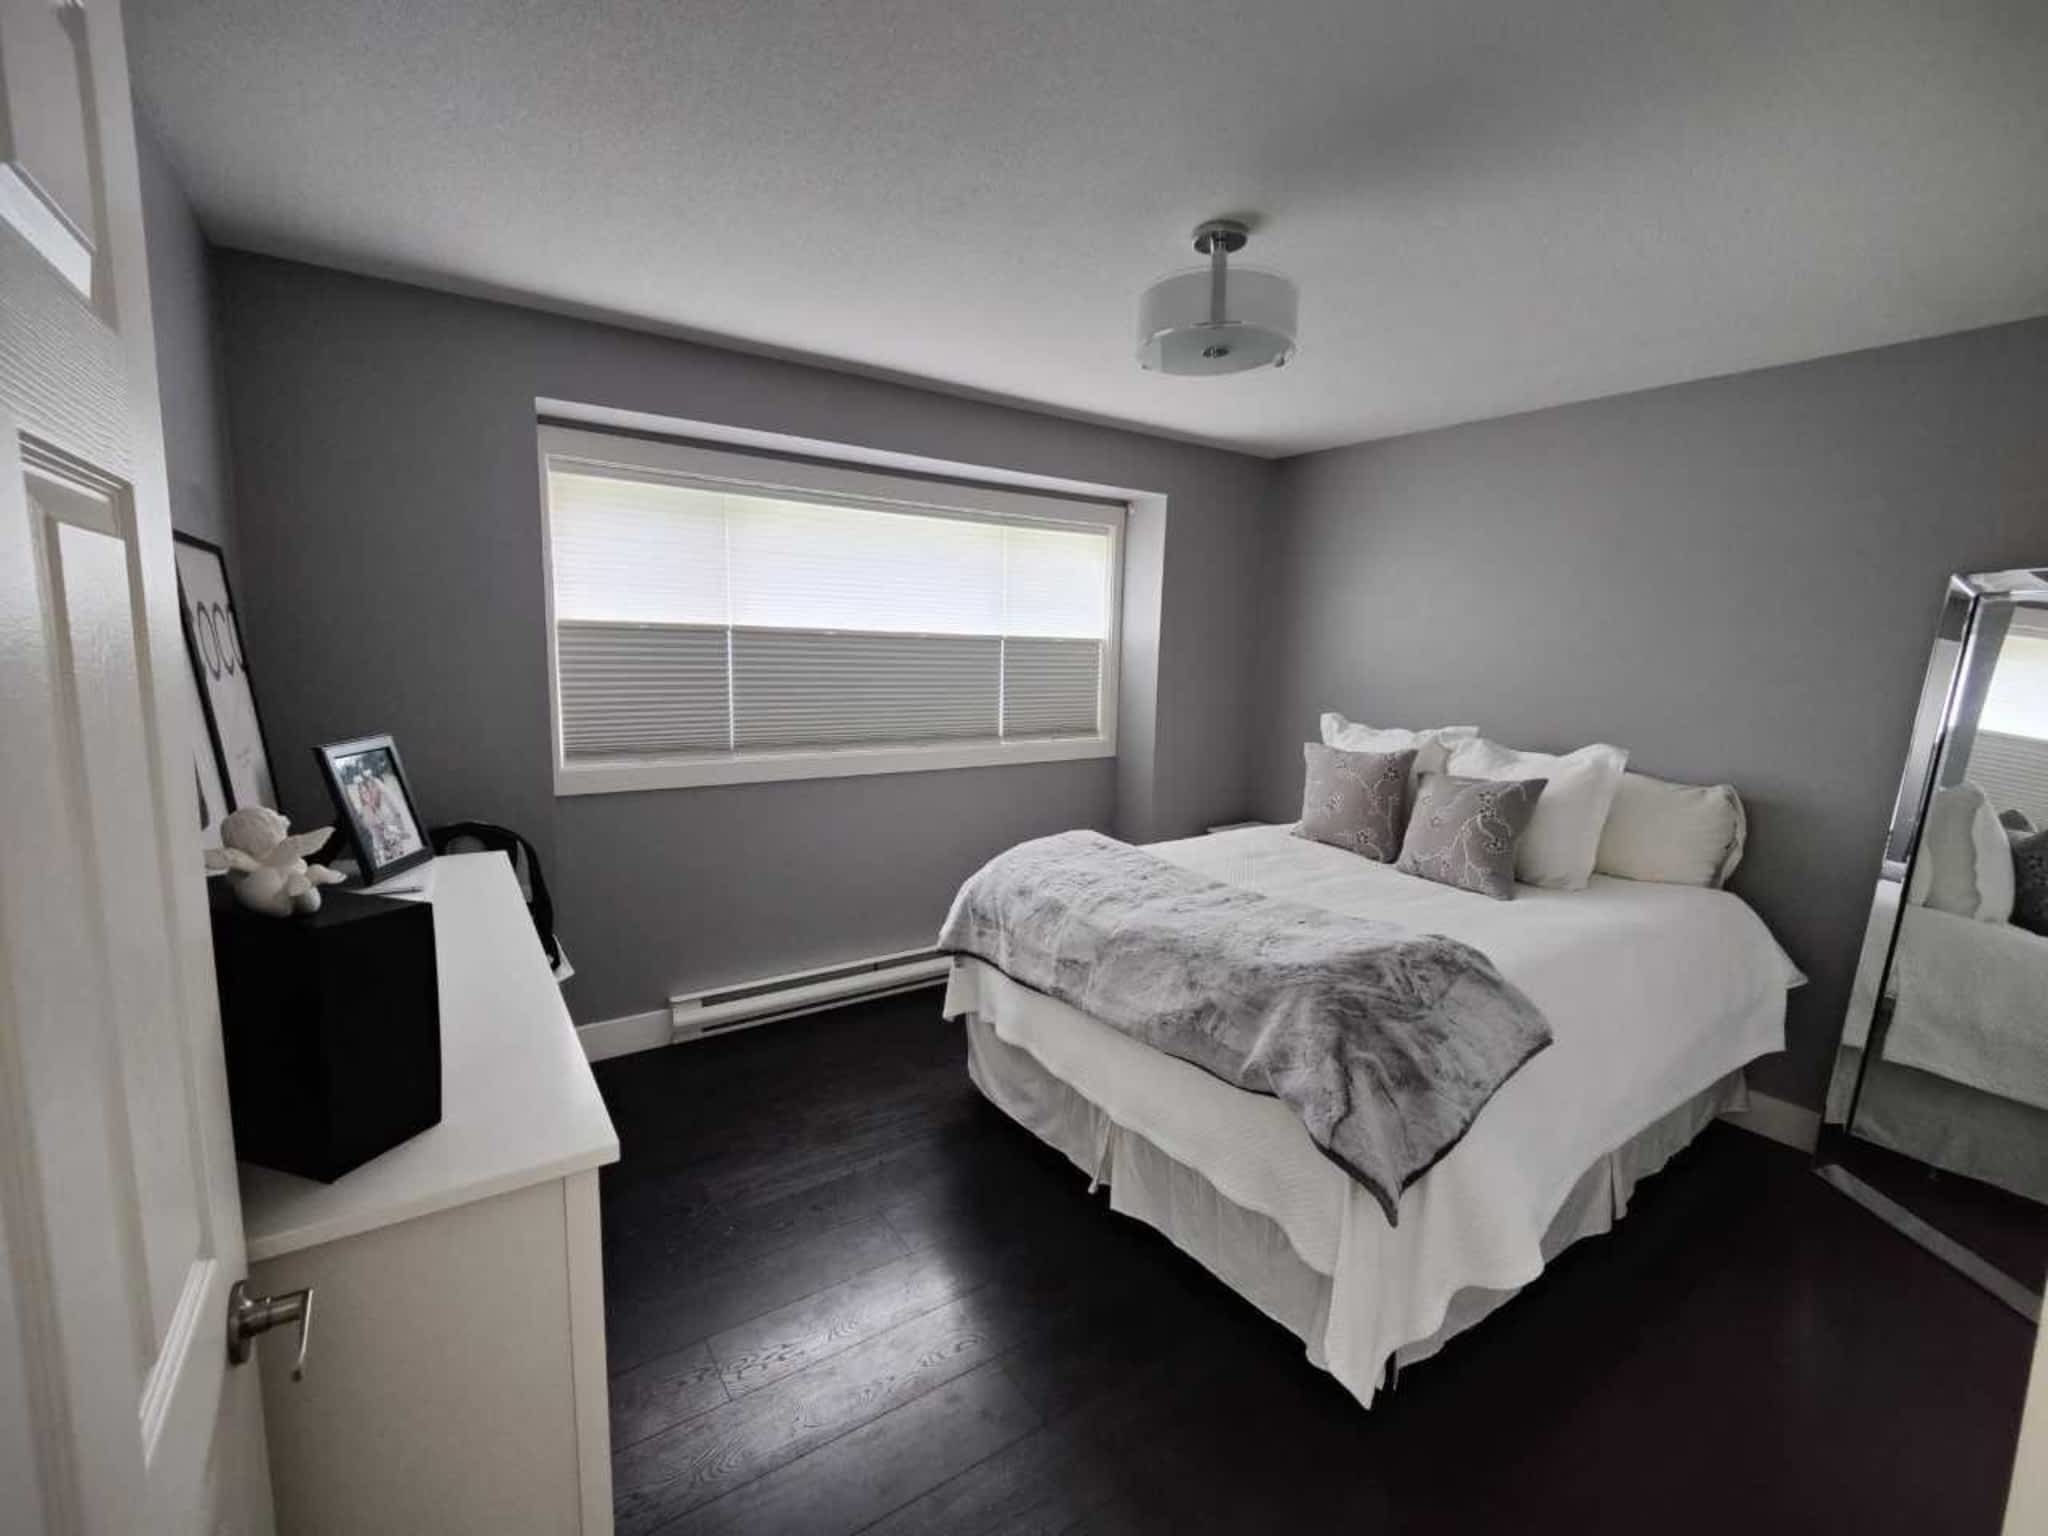 photo Budget Blinds of Delta, South Surrey and White Rock